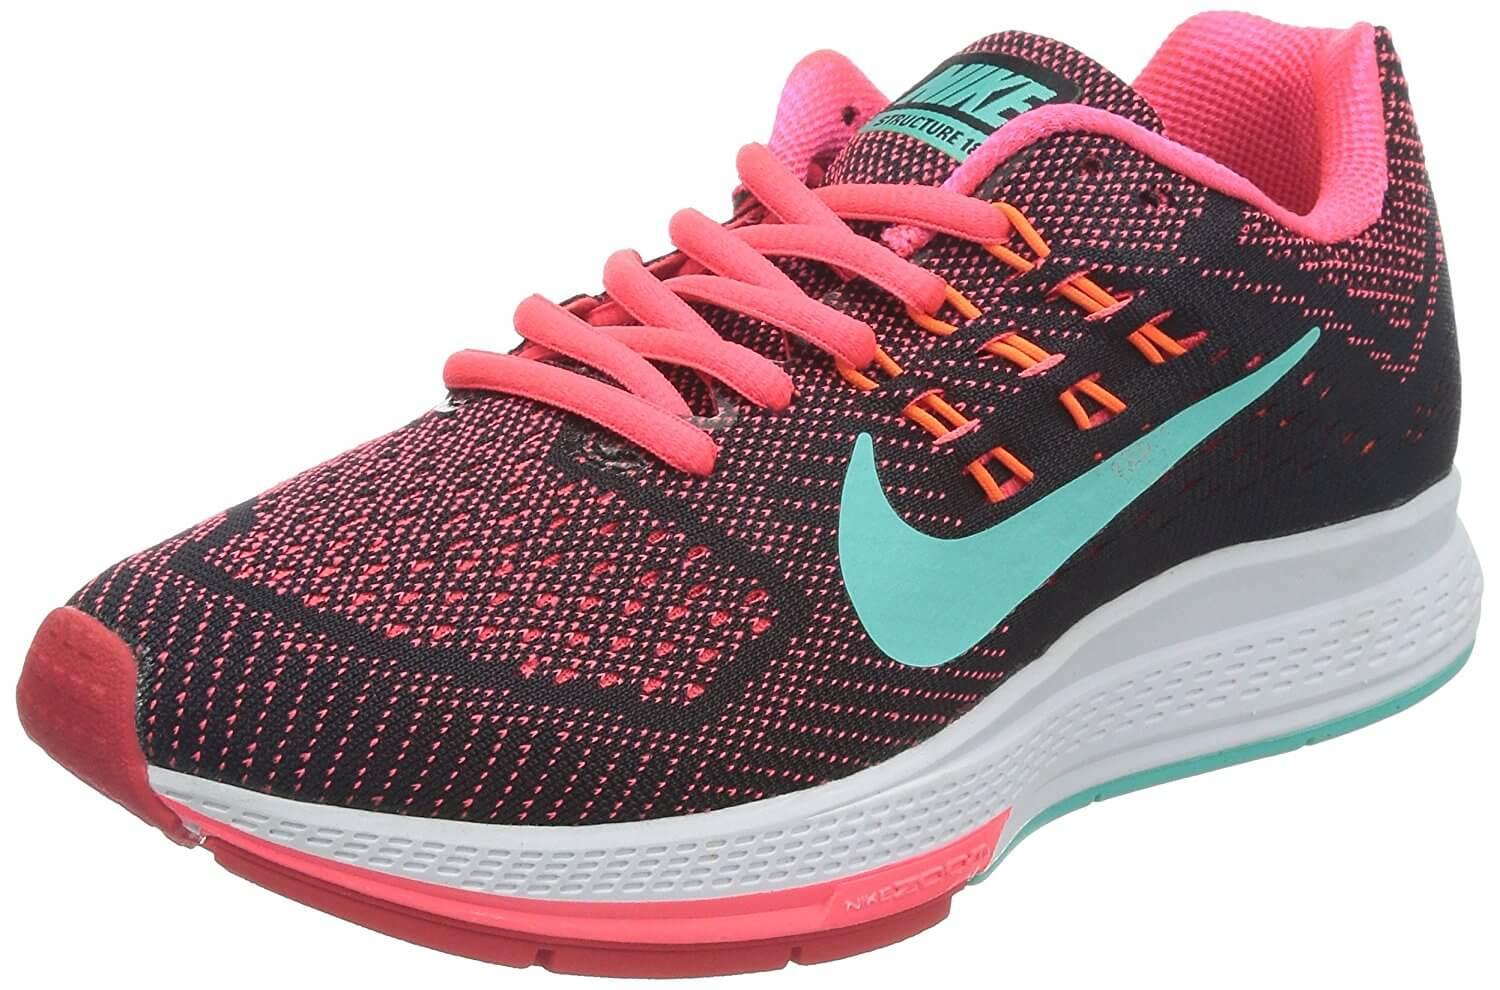 Imperio Inca Hacer deporte orgánico Nike Air Zoom Structure 18 Reviewed & Compared in 2022 | RunnerClick